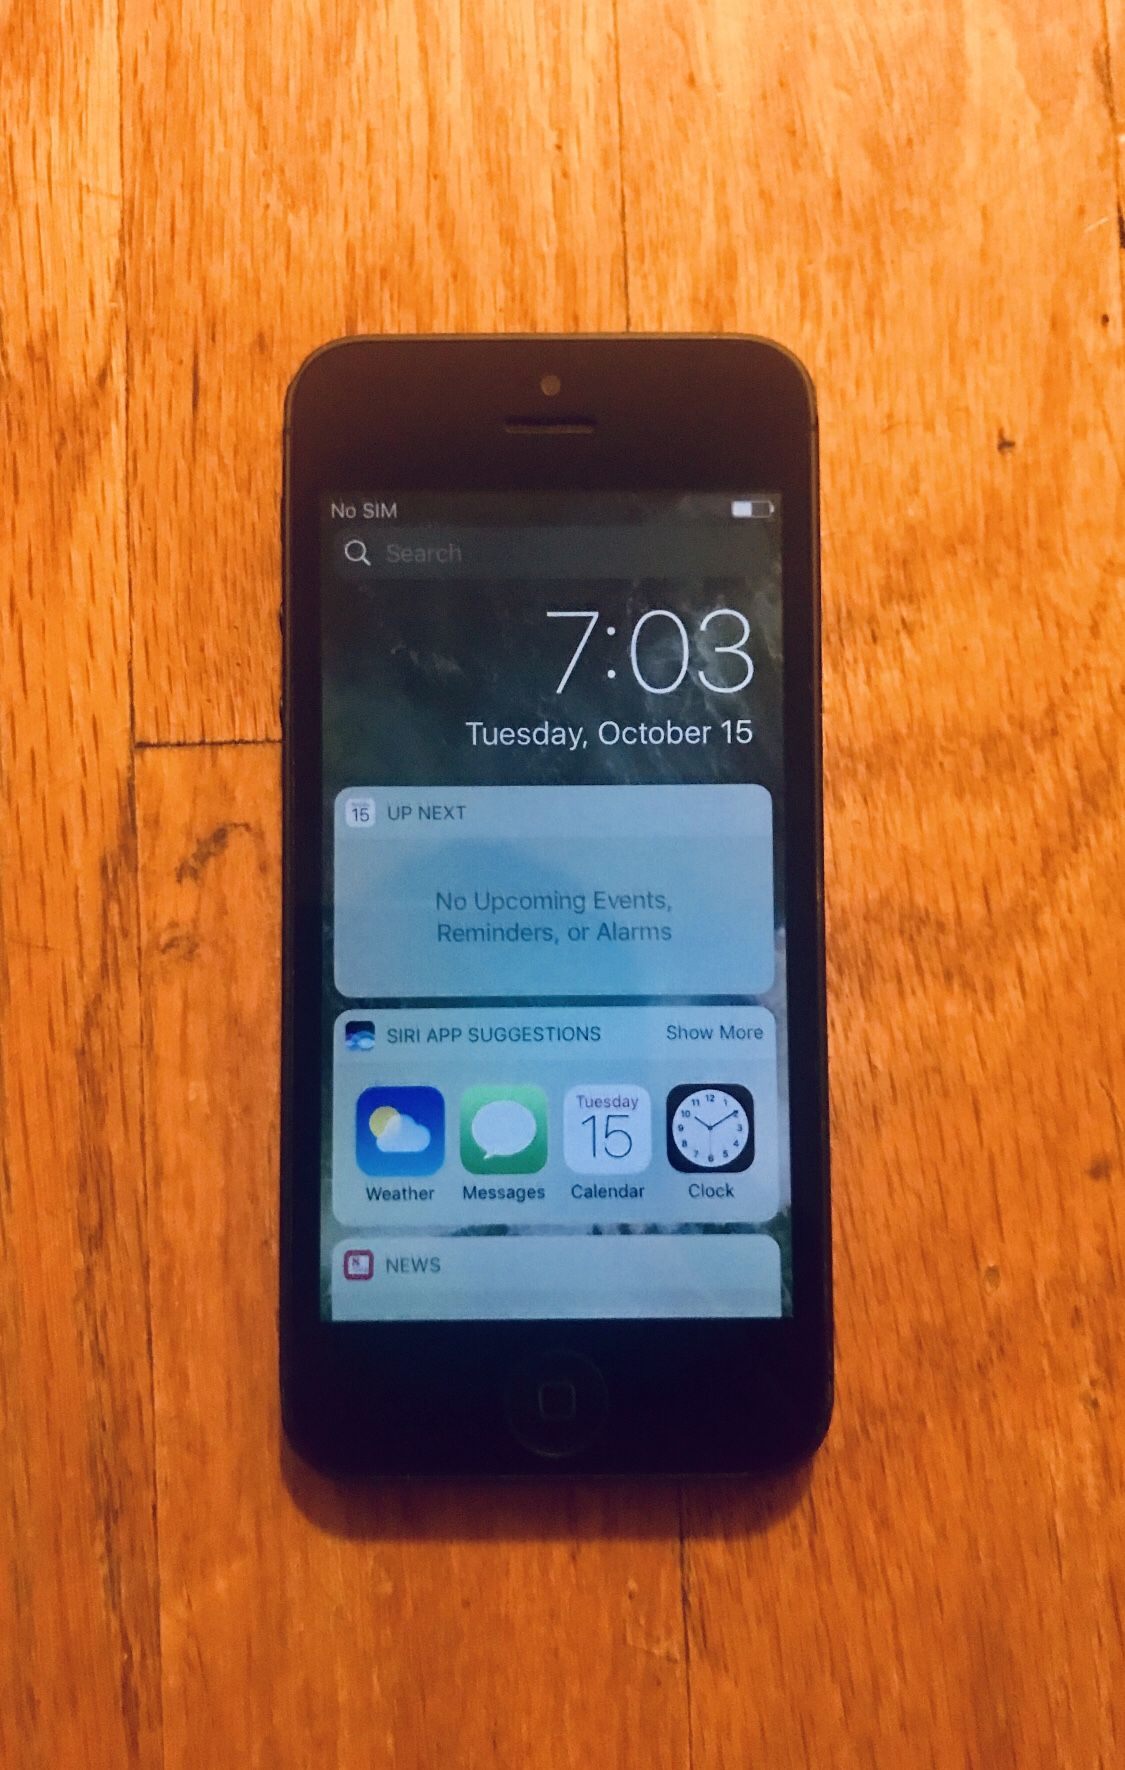 *THIS IS A STEAL* EXCELLENT CONDITION IPHONE 5 UNLOCKED FOR ALL CARRIERS (16gb)